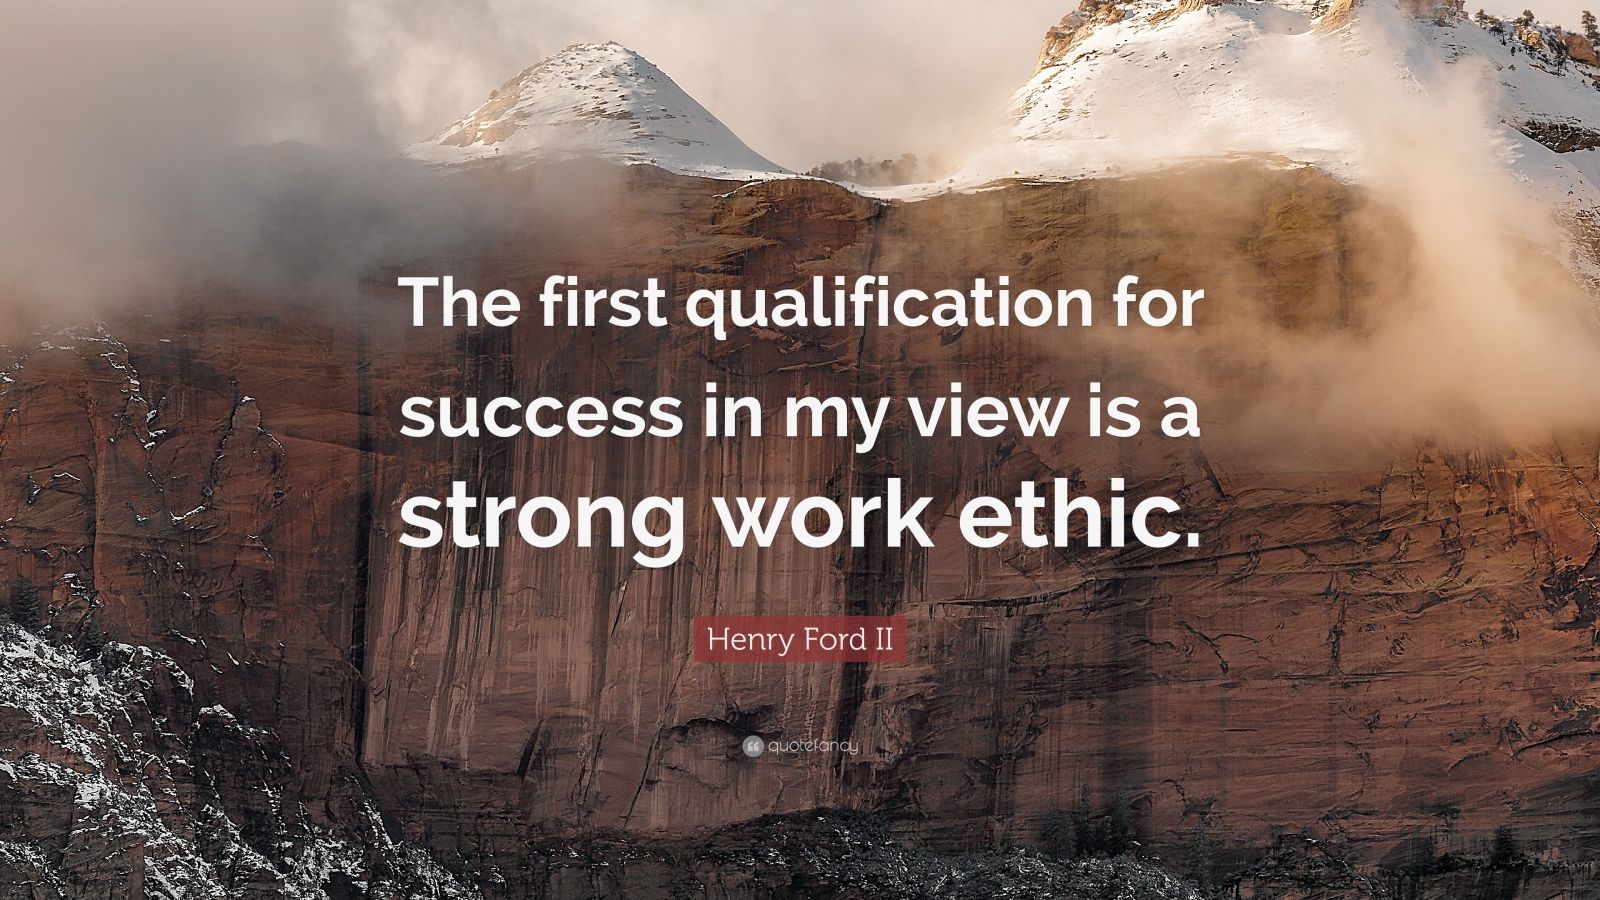 Henry Ford II Quote: “The first qualification for success in my view is